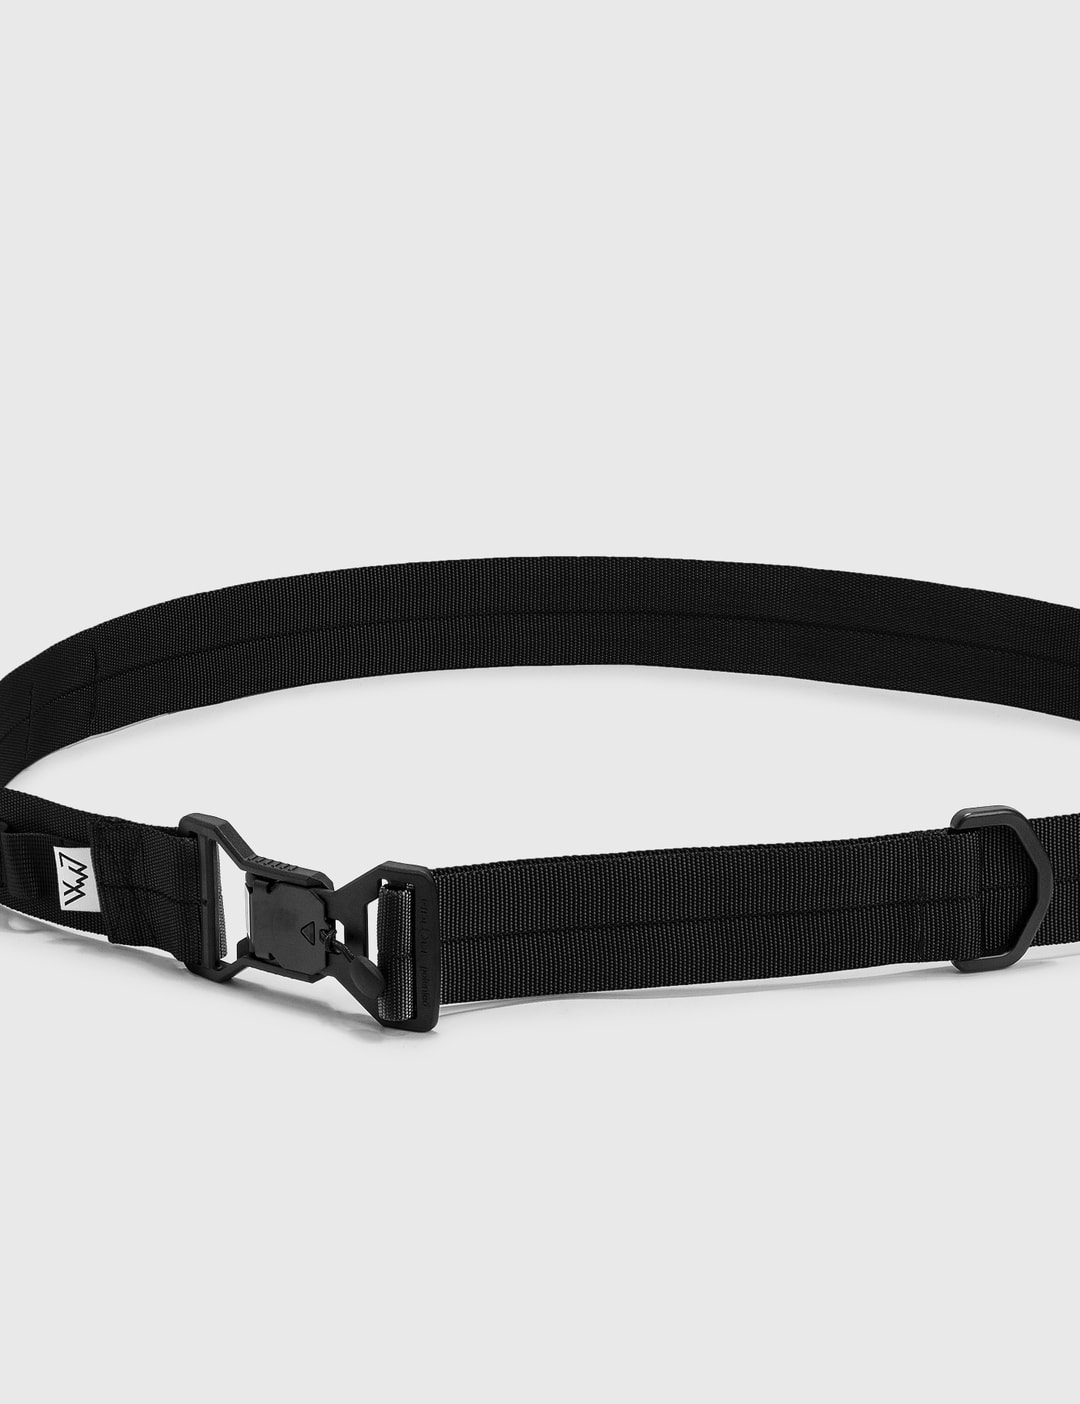 Comfy Outdoor Garment - Fidlock Belt | HBX - Globally Curated Fashion ...